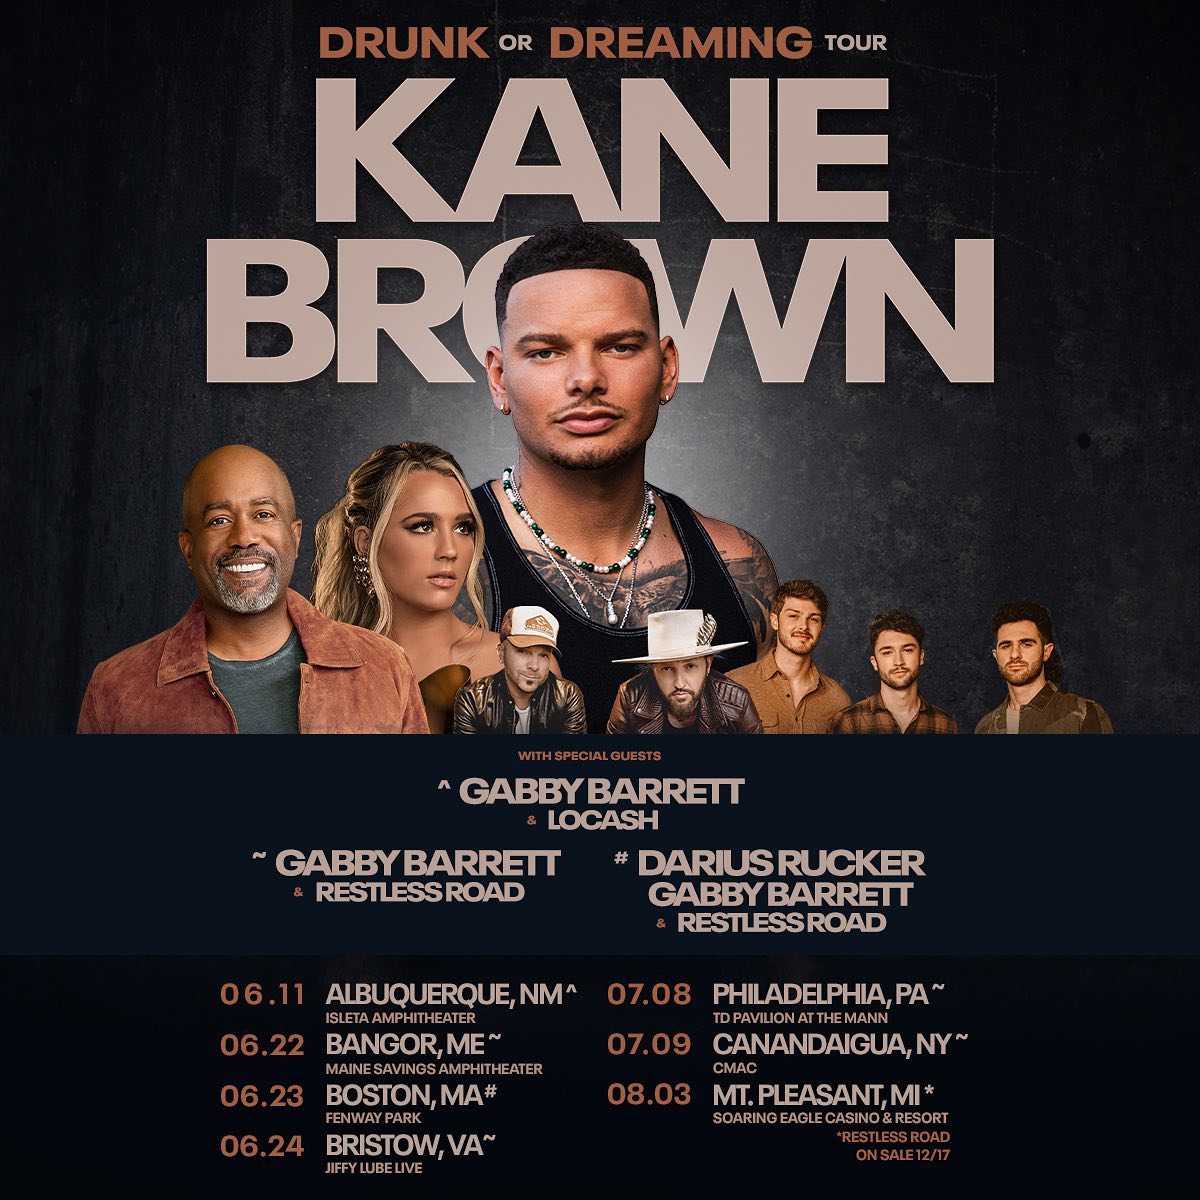 Kane Brown's Drunk Or Dreaming Tour with Gabby Barrett, LOCASH, Restless Road, and Darius Rucker in Spring/Summer 2023
